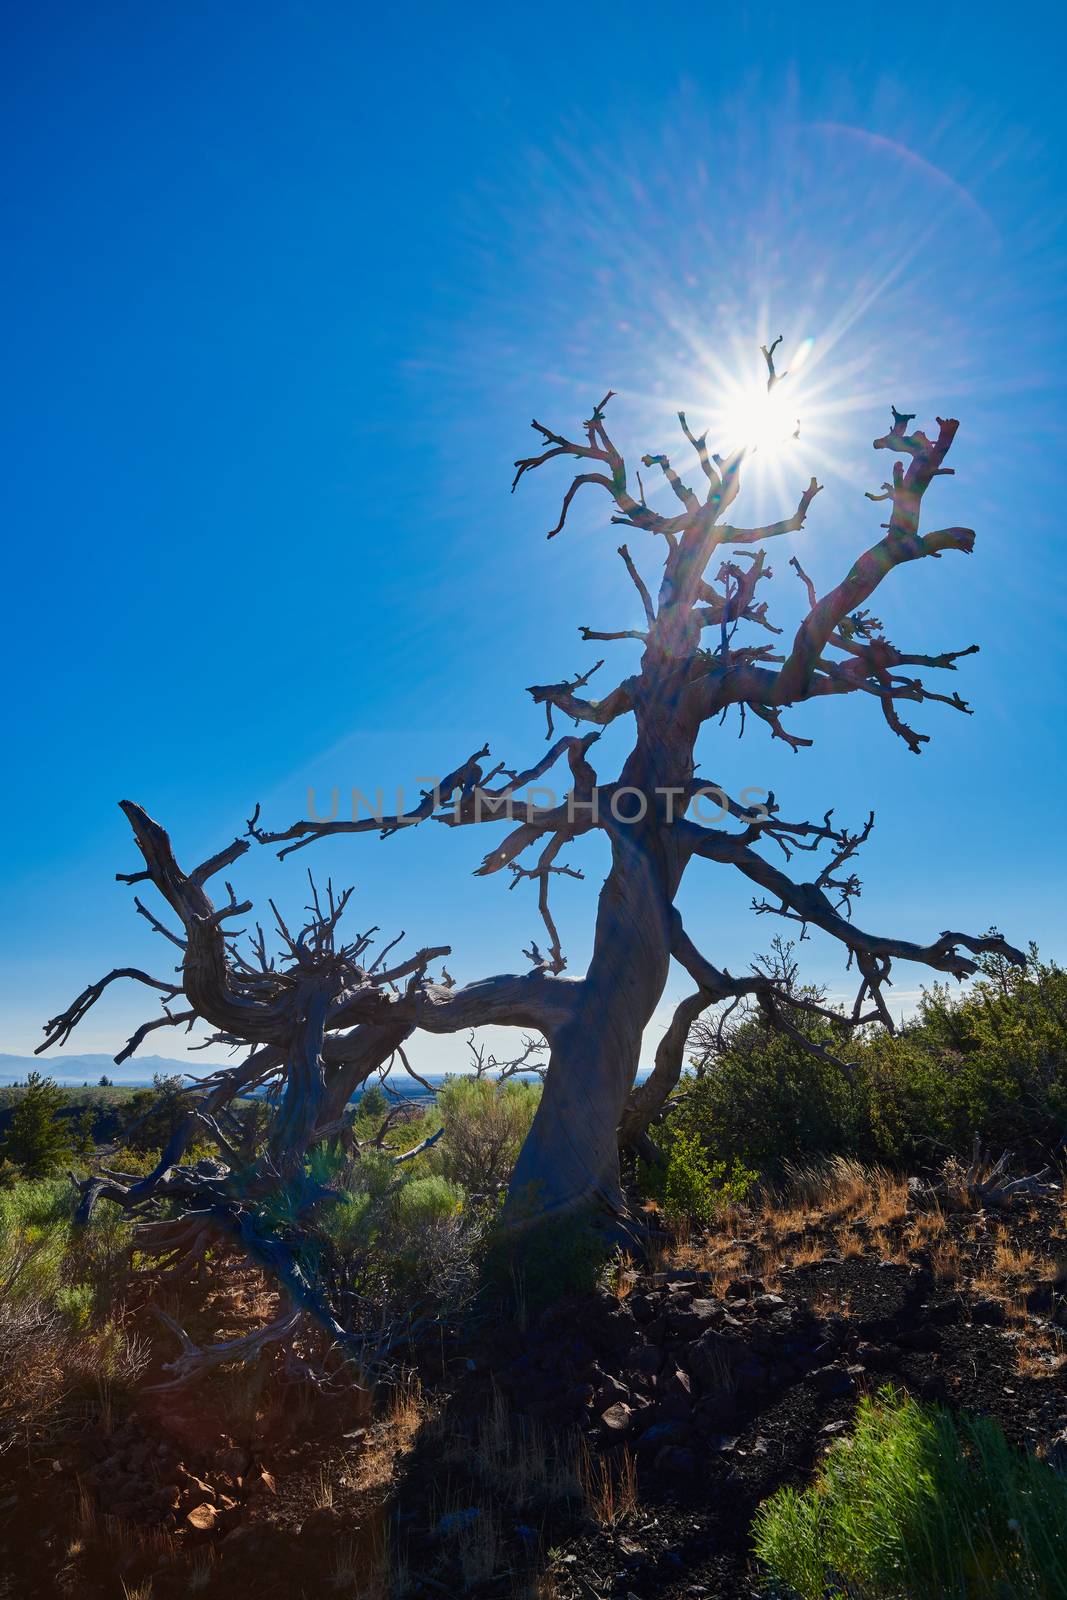 Dead Limber Pine with sun and blue sky.  At Craters of the Moon National Park.